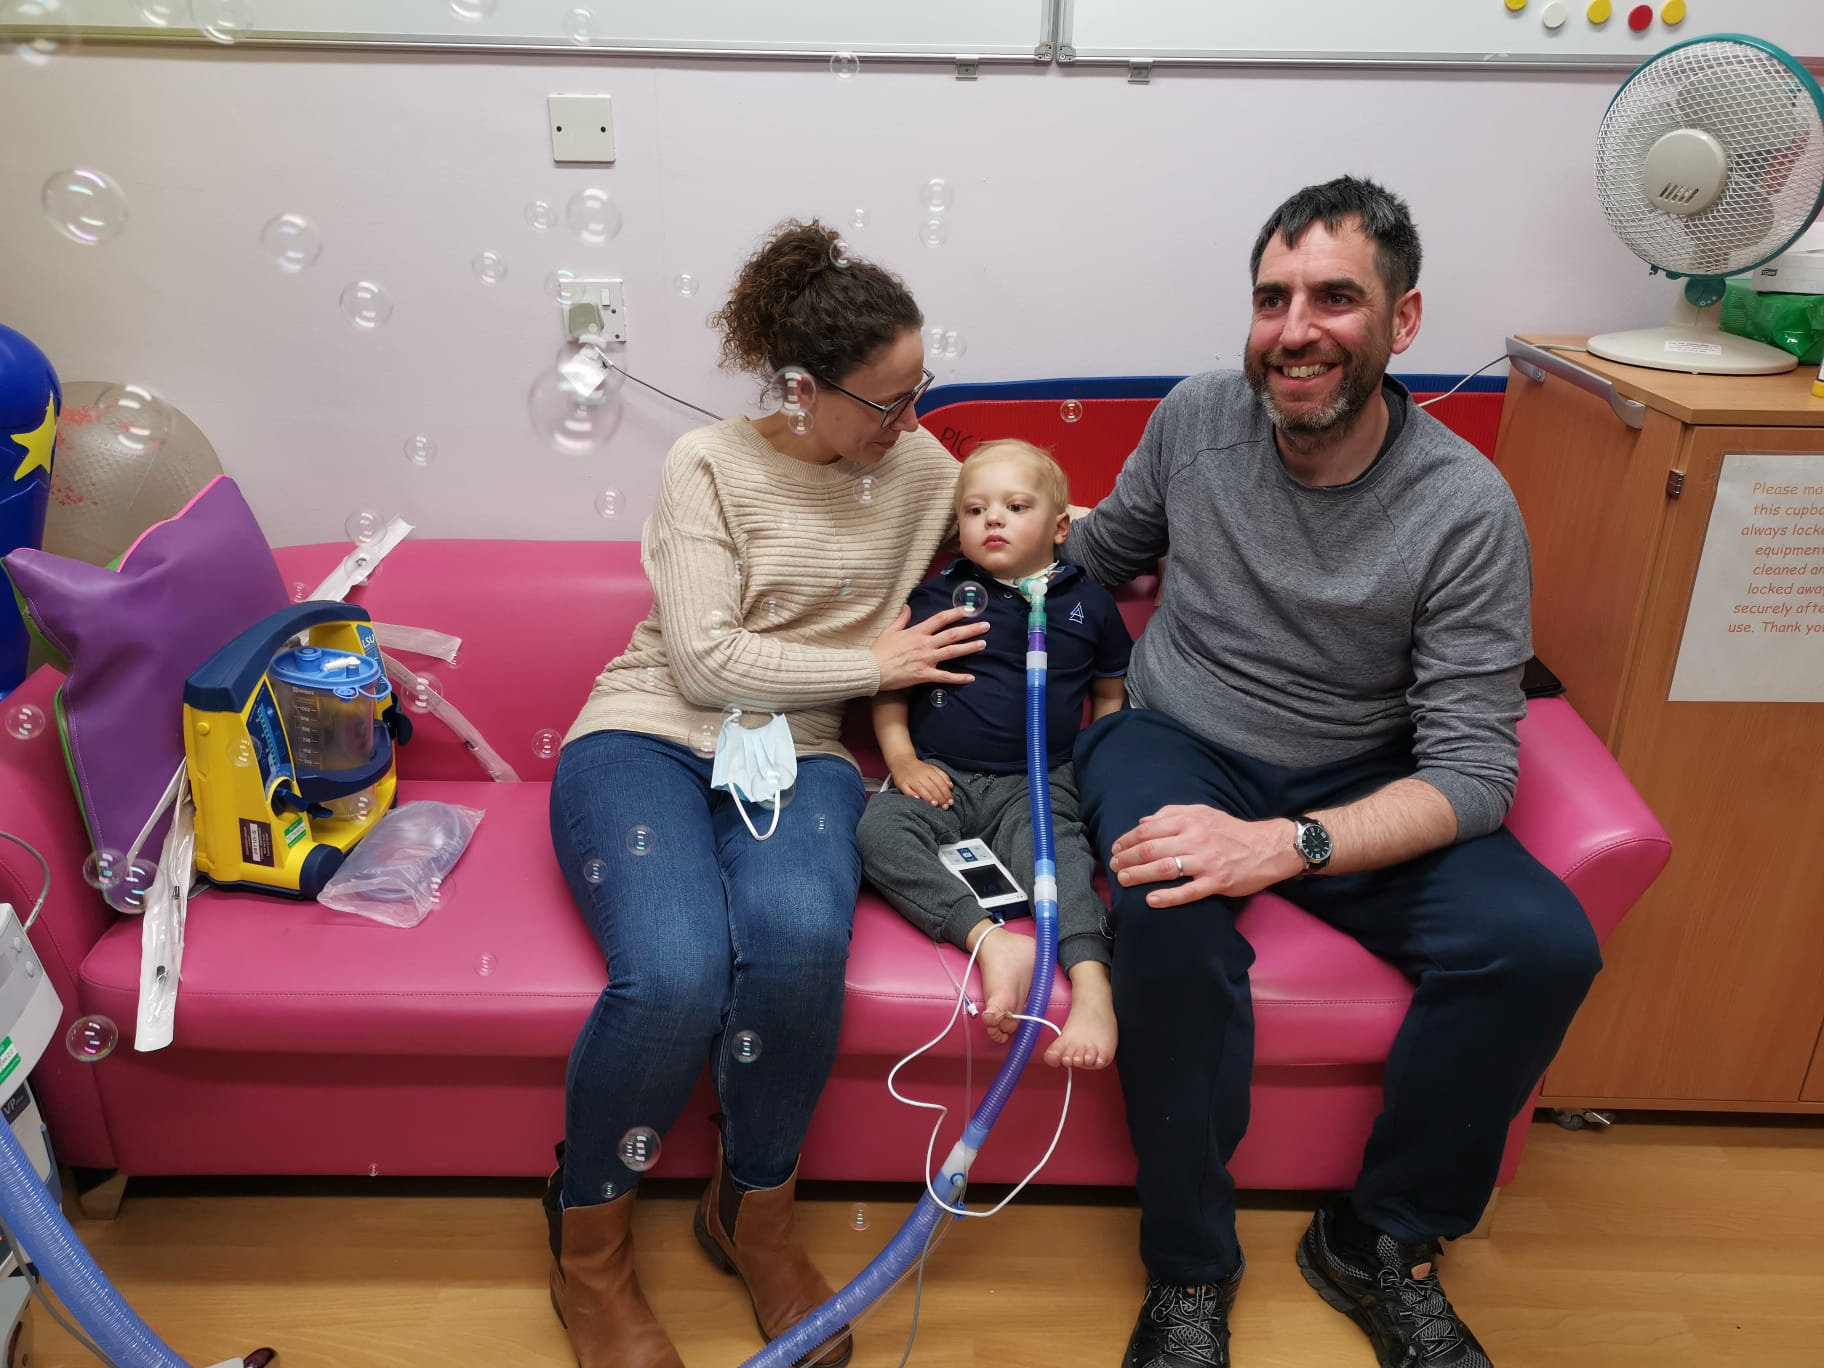 Dad Gregg (pictured with Lindsay and Sebastian), 43, described feeling "numb" after nurses told him Sebastian might not survive